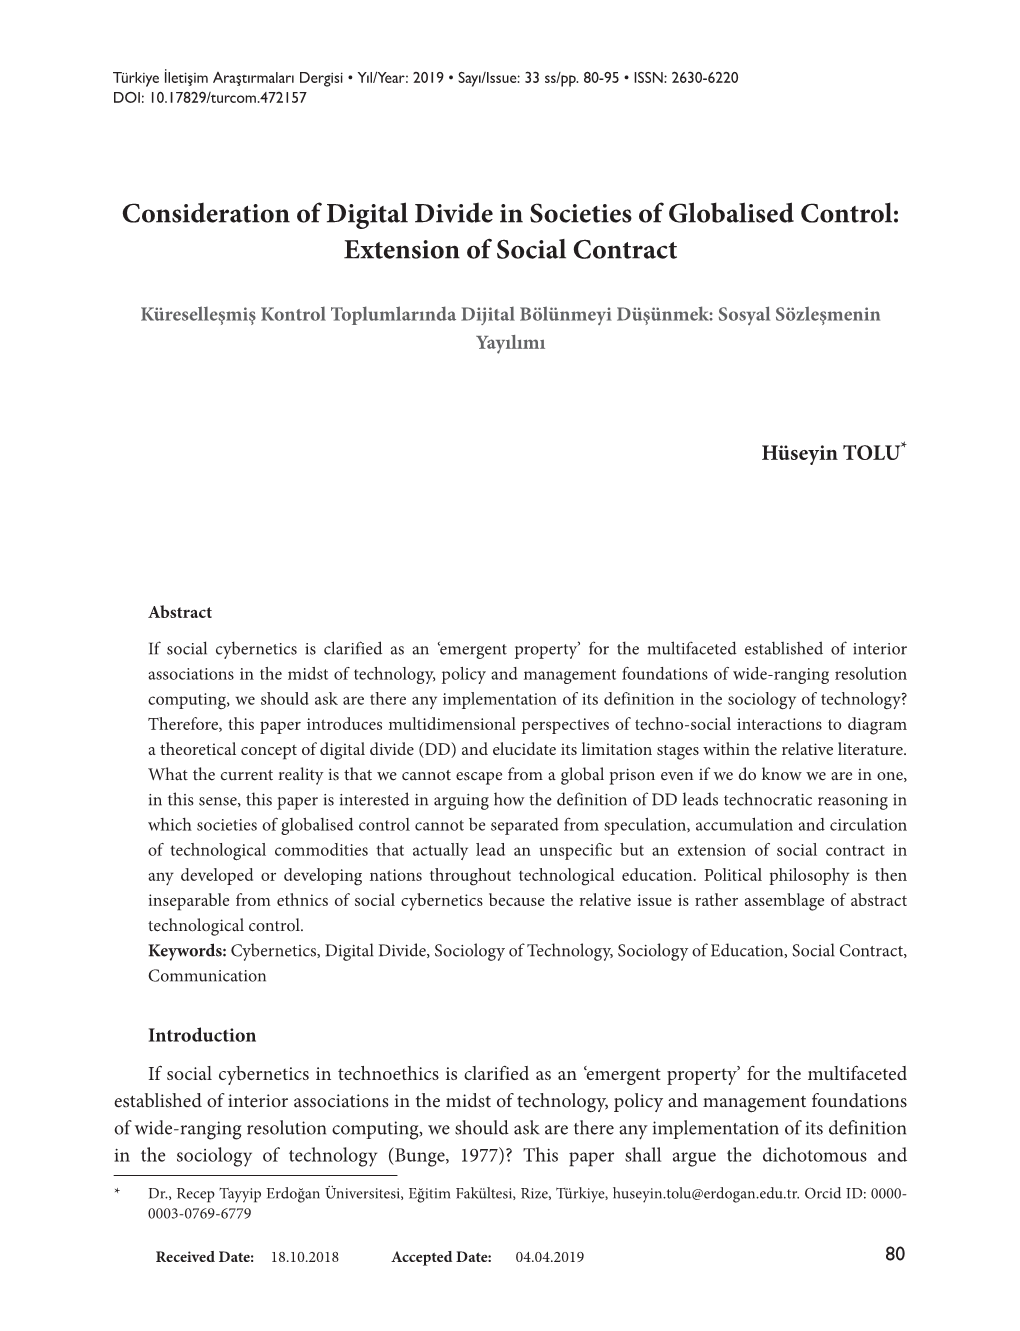 Consideration of Digital Divide in Societies of Globalised Control: Extension of Social Contract